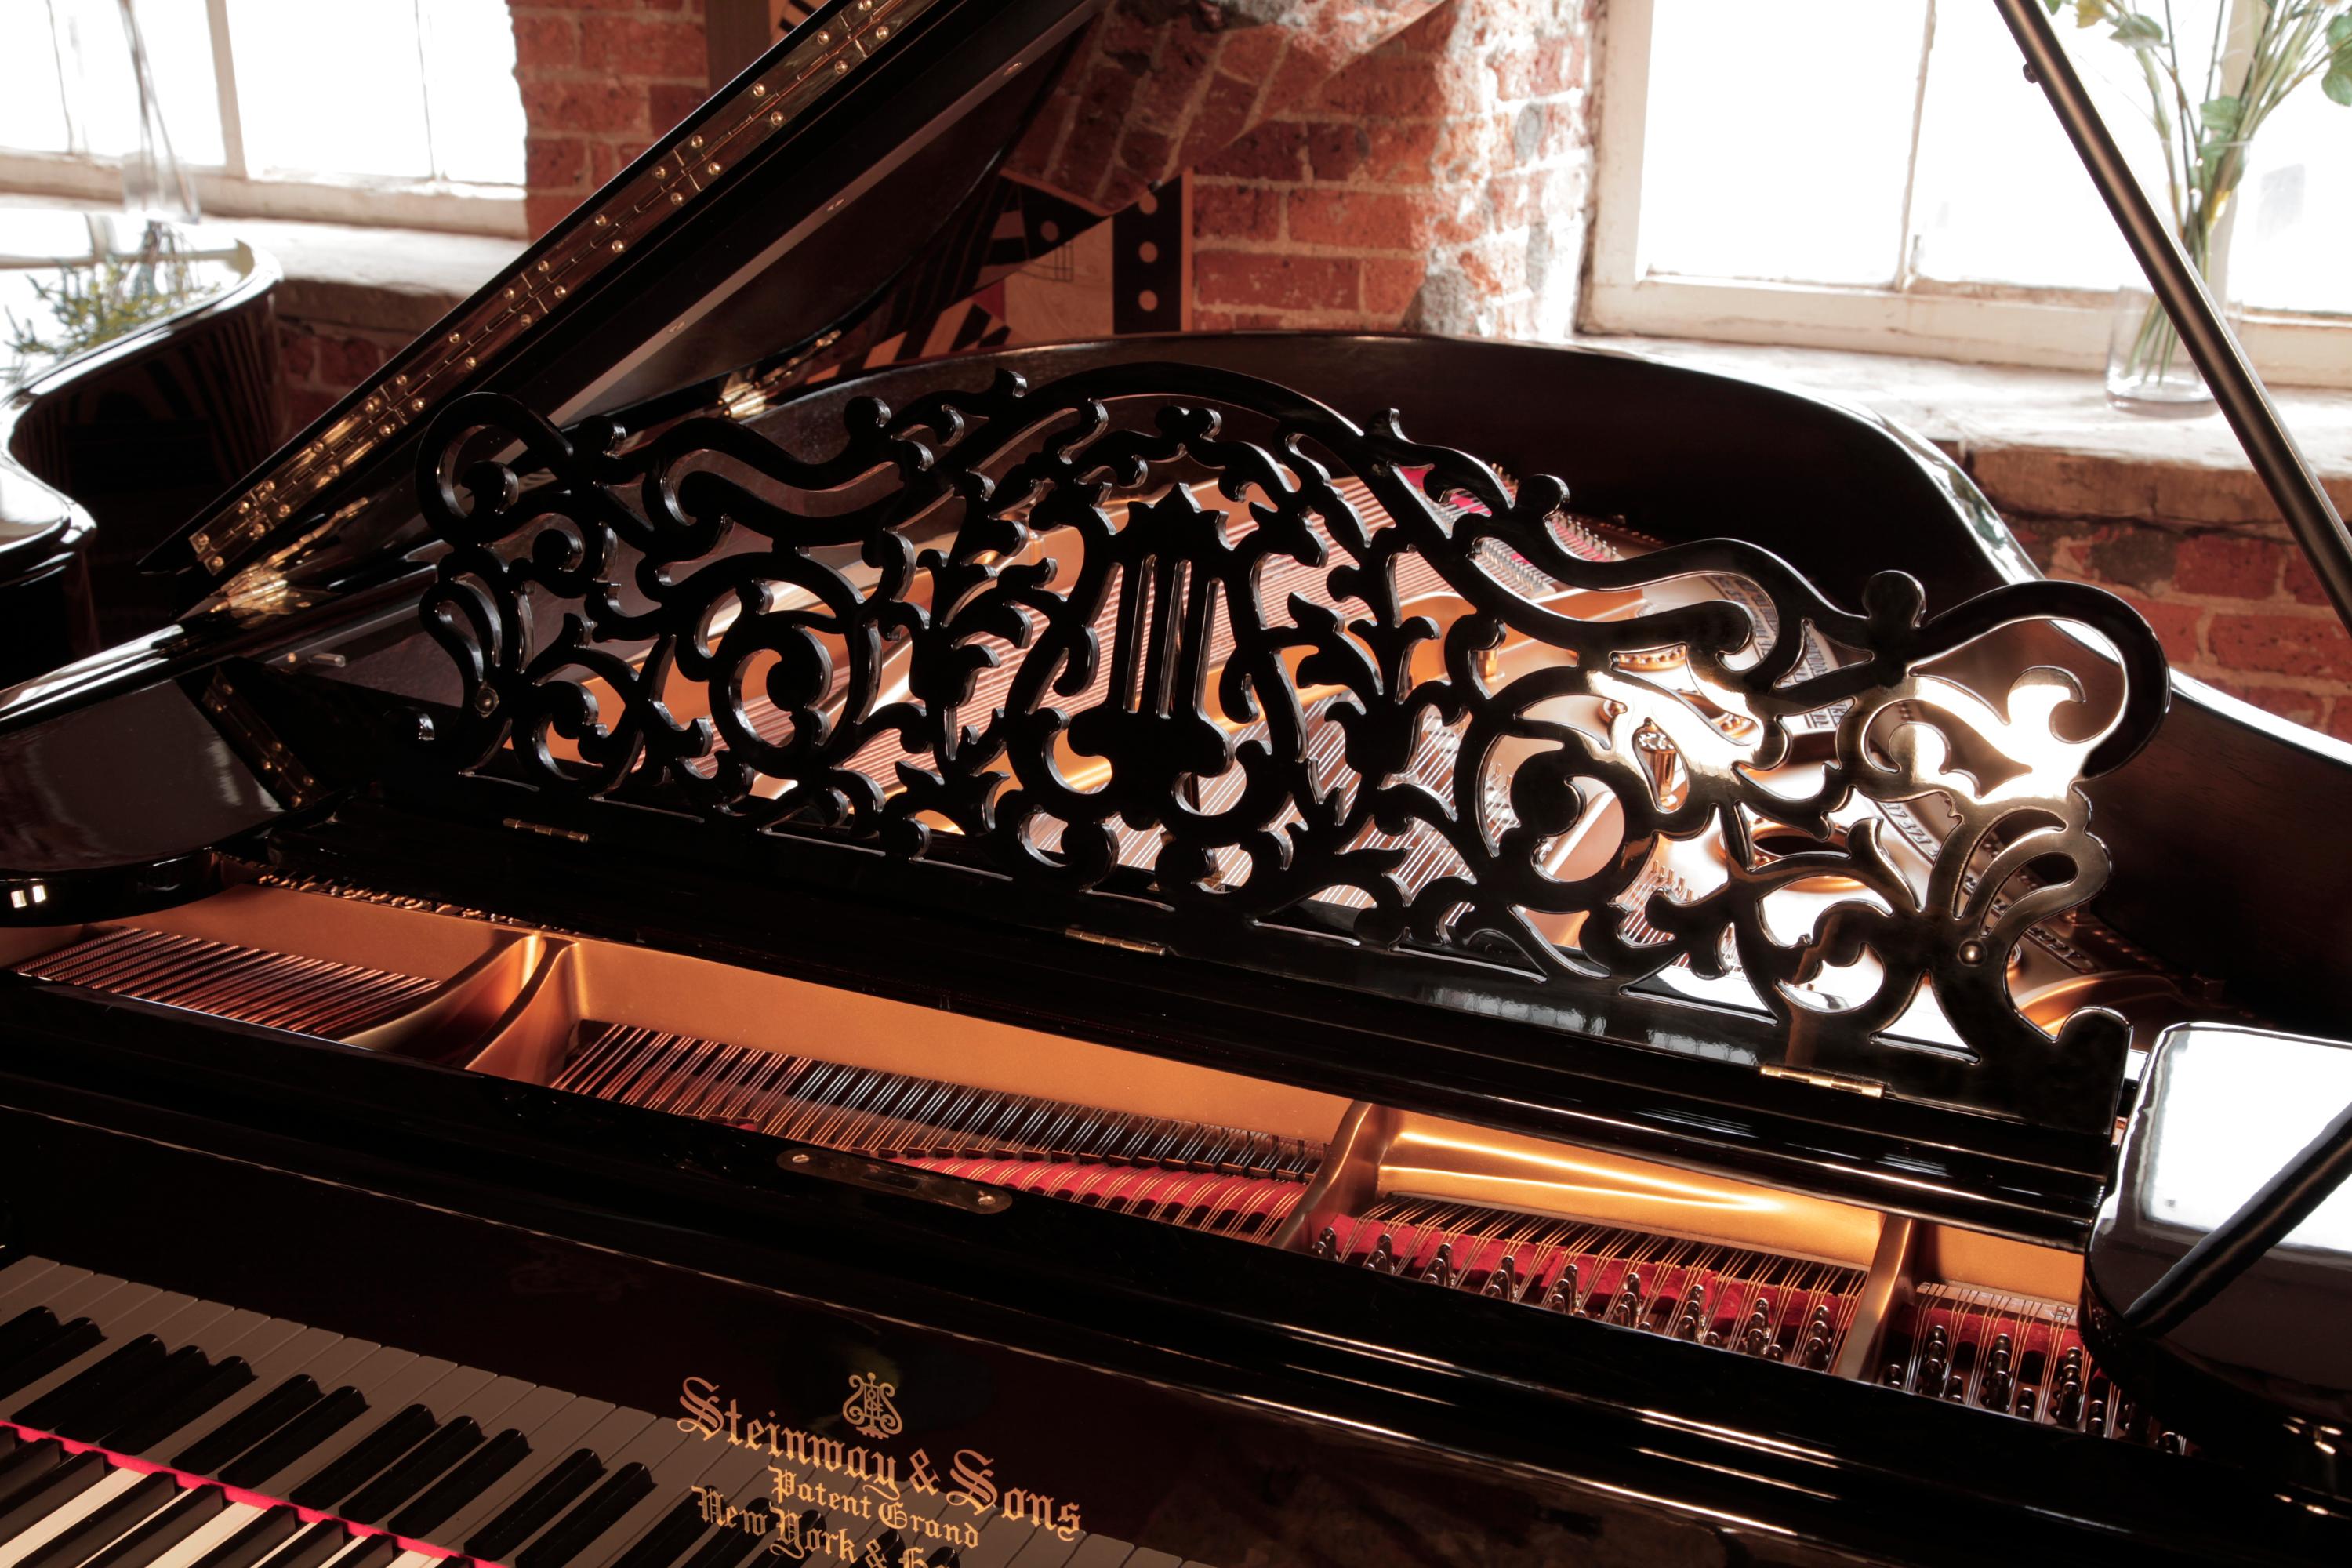 steinway & sons grand piano model a black high gloss. steinway & sons